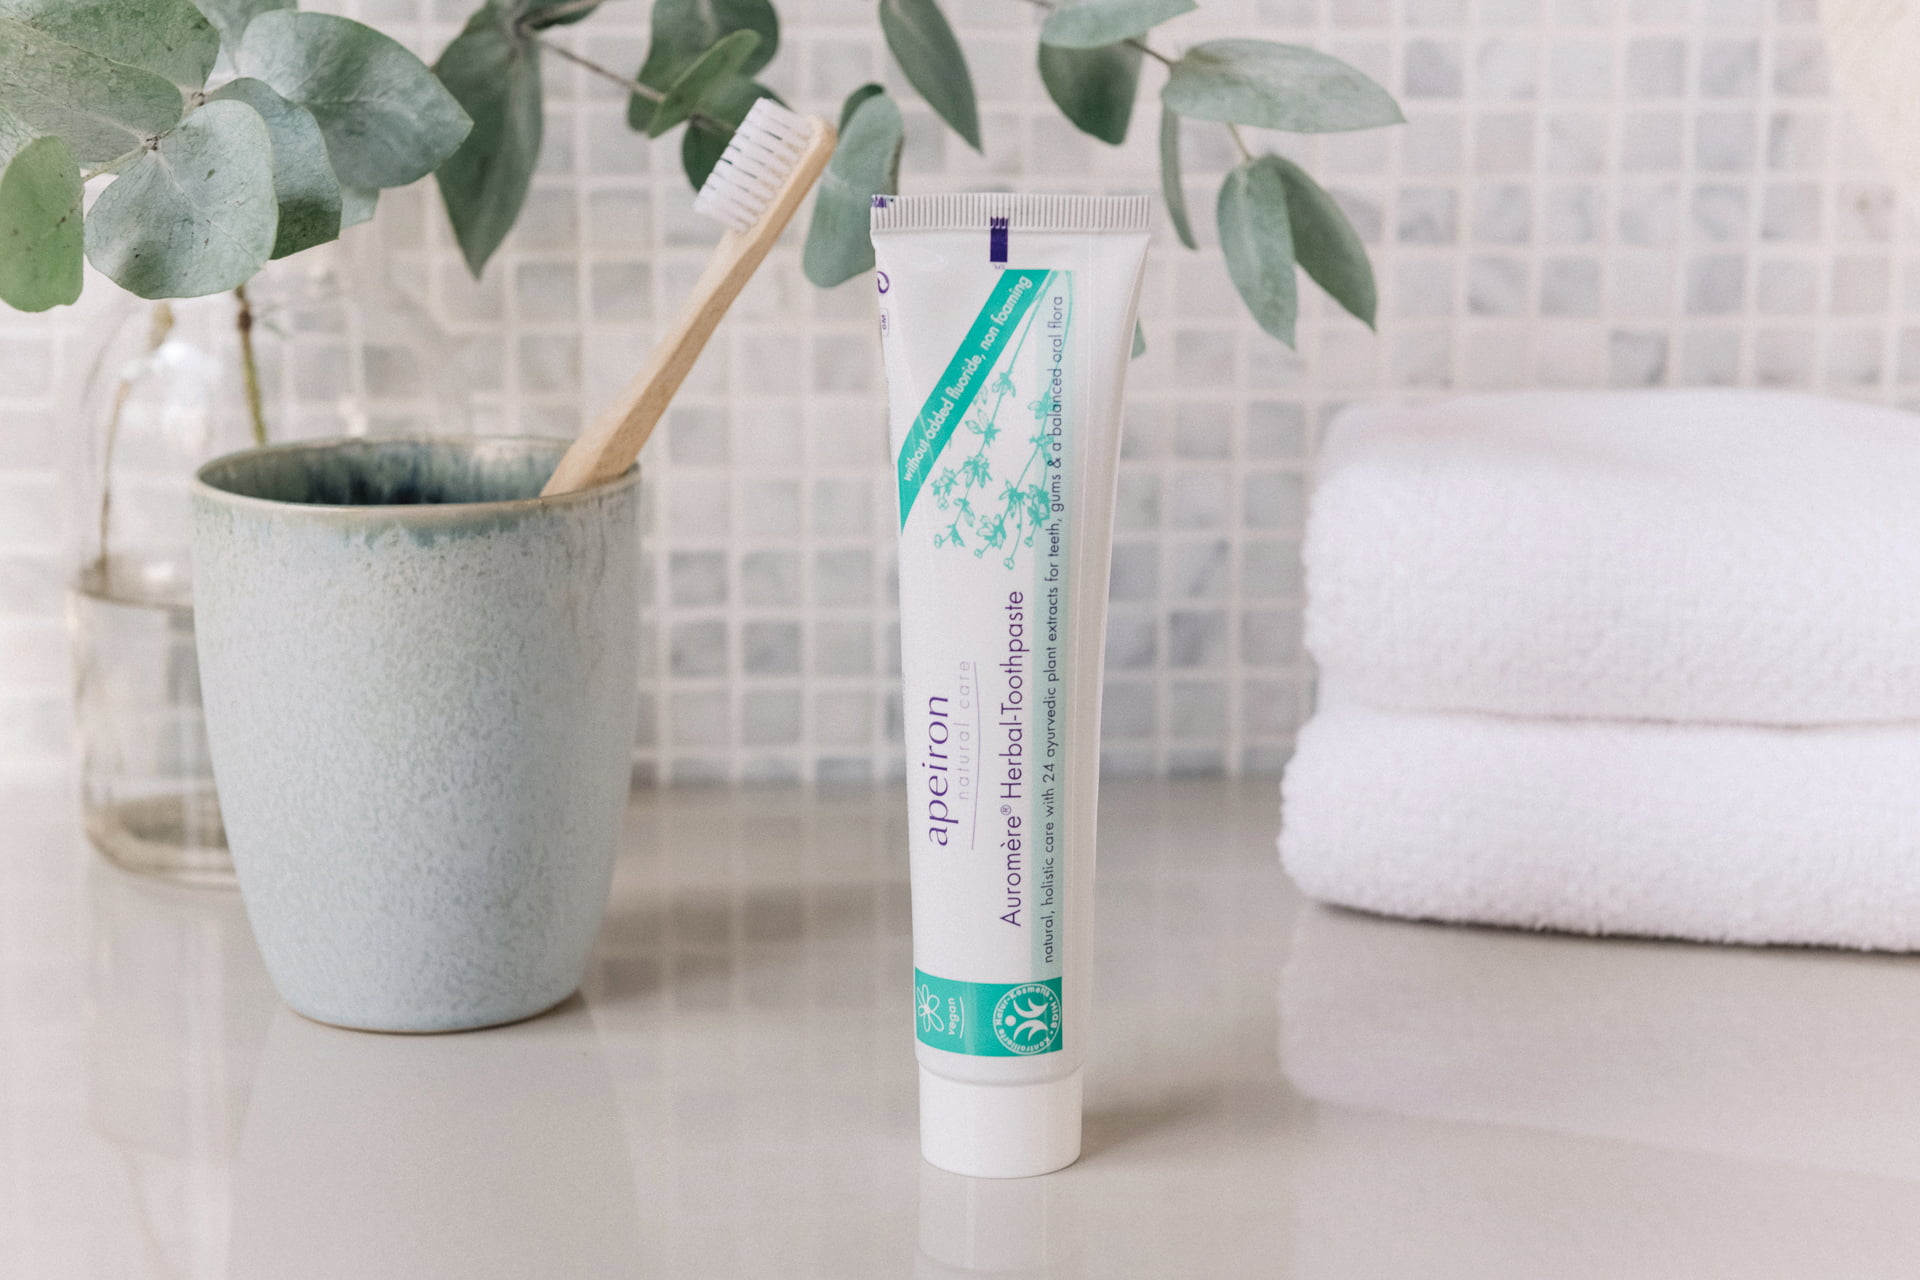 Herbal Toothpaste vs. Conventional Toothpaste: Which is Better?